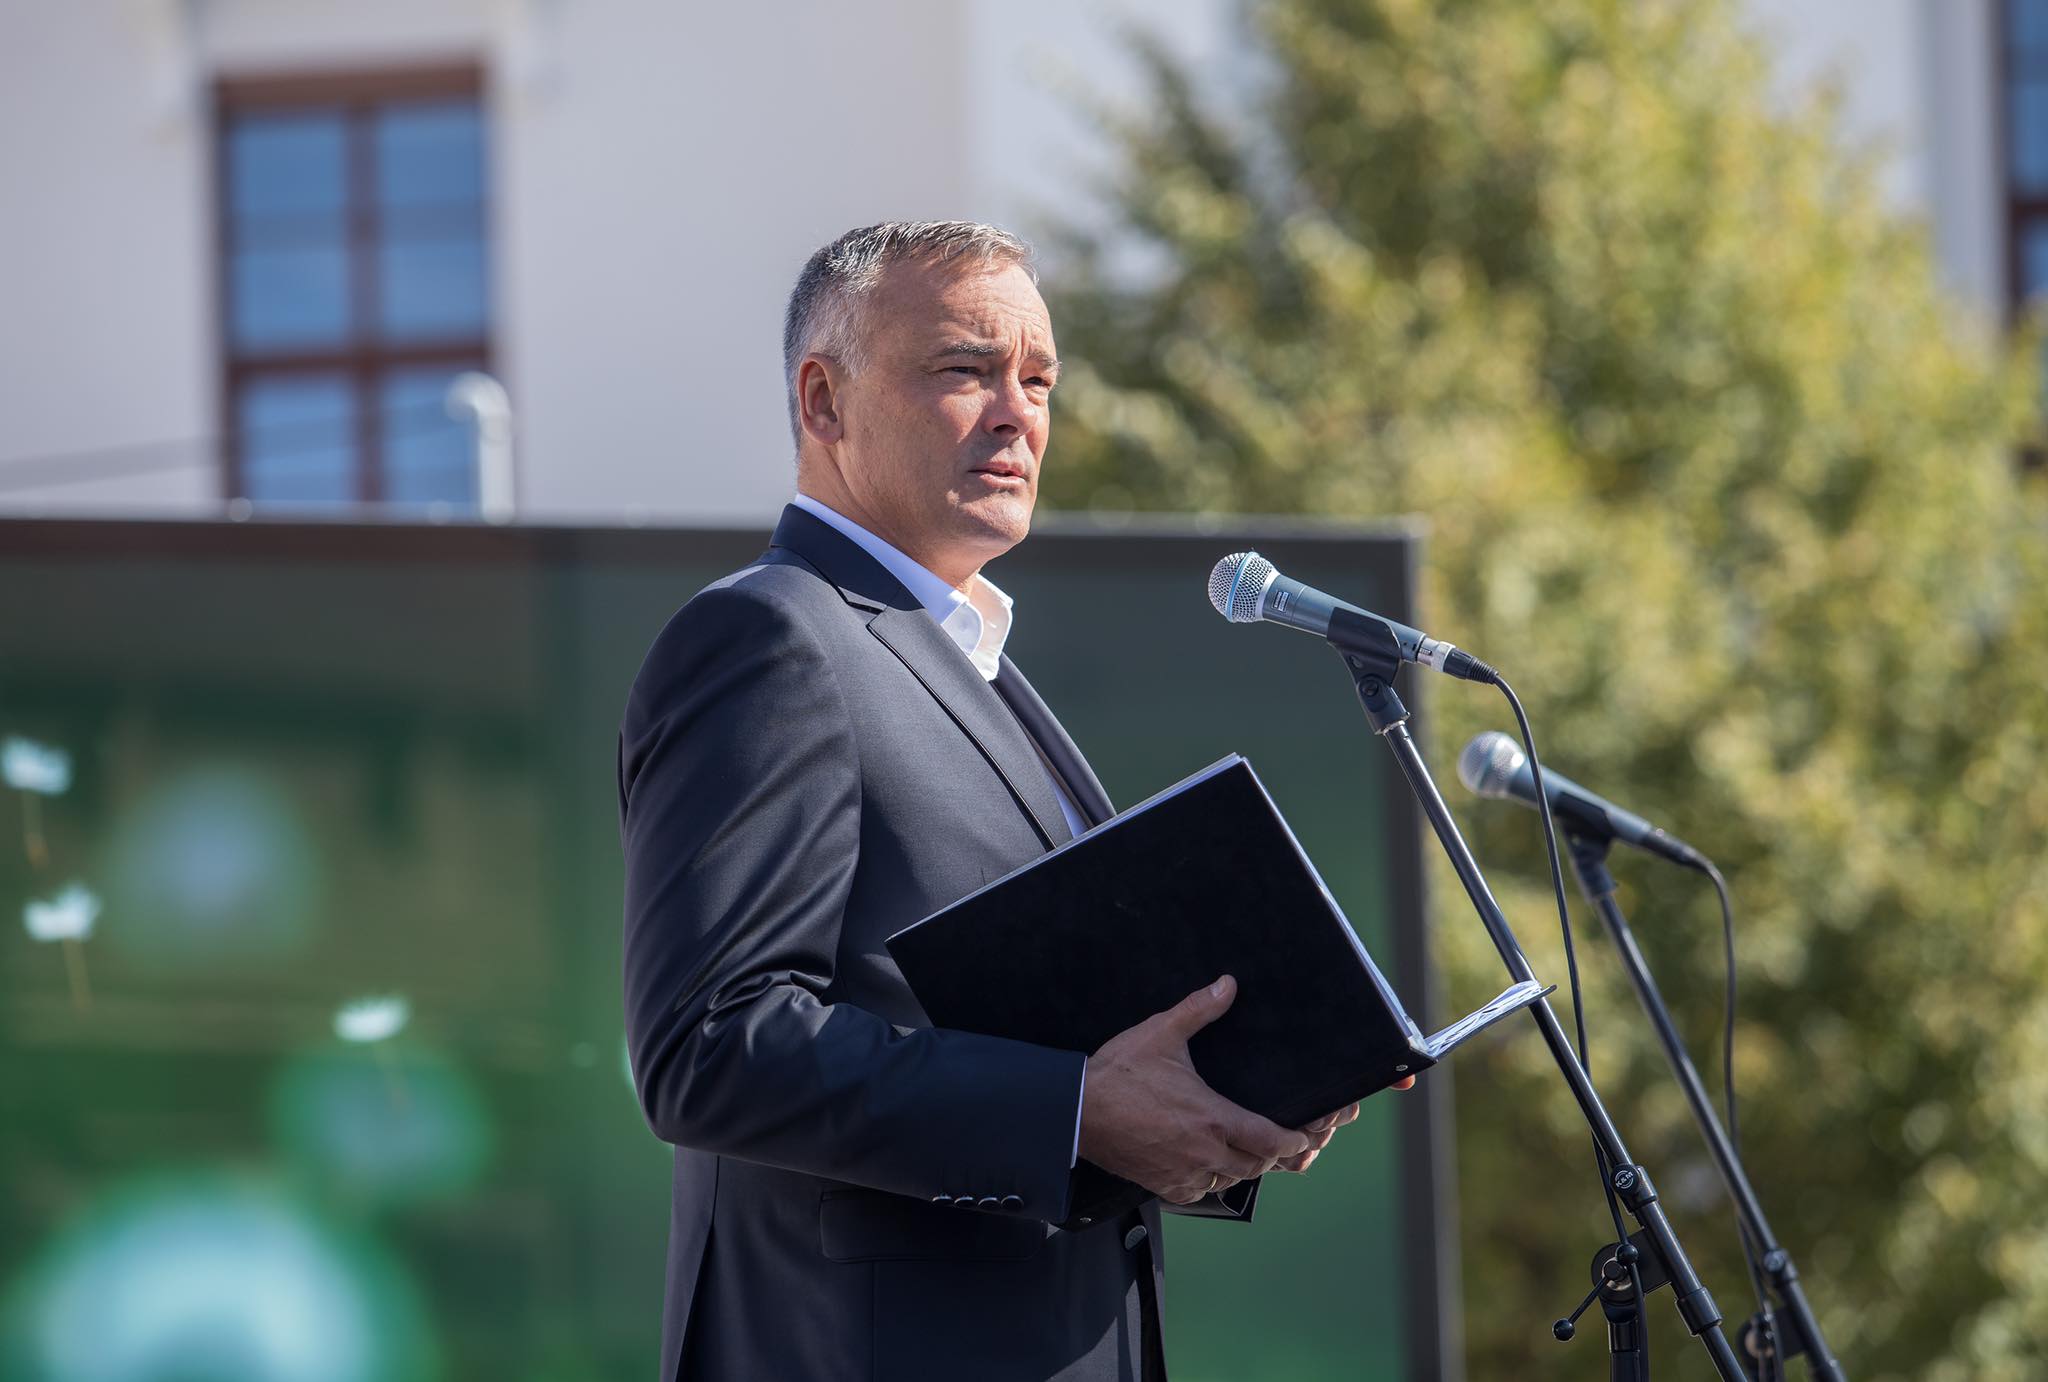 Leaked Sex Video, Corruption Allegations of Incumbent Fidesz Mayor Stirs Controversy